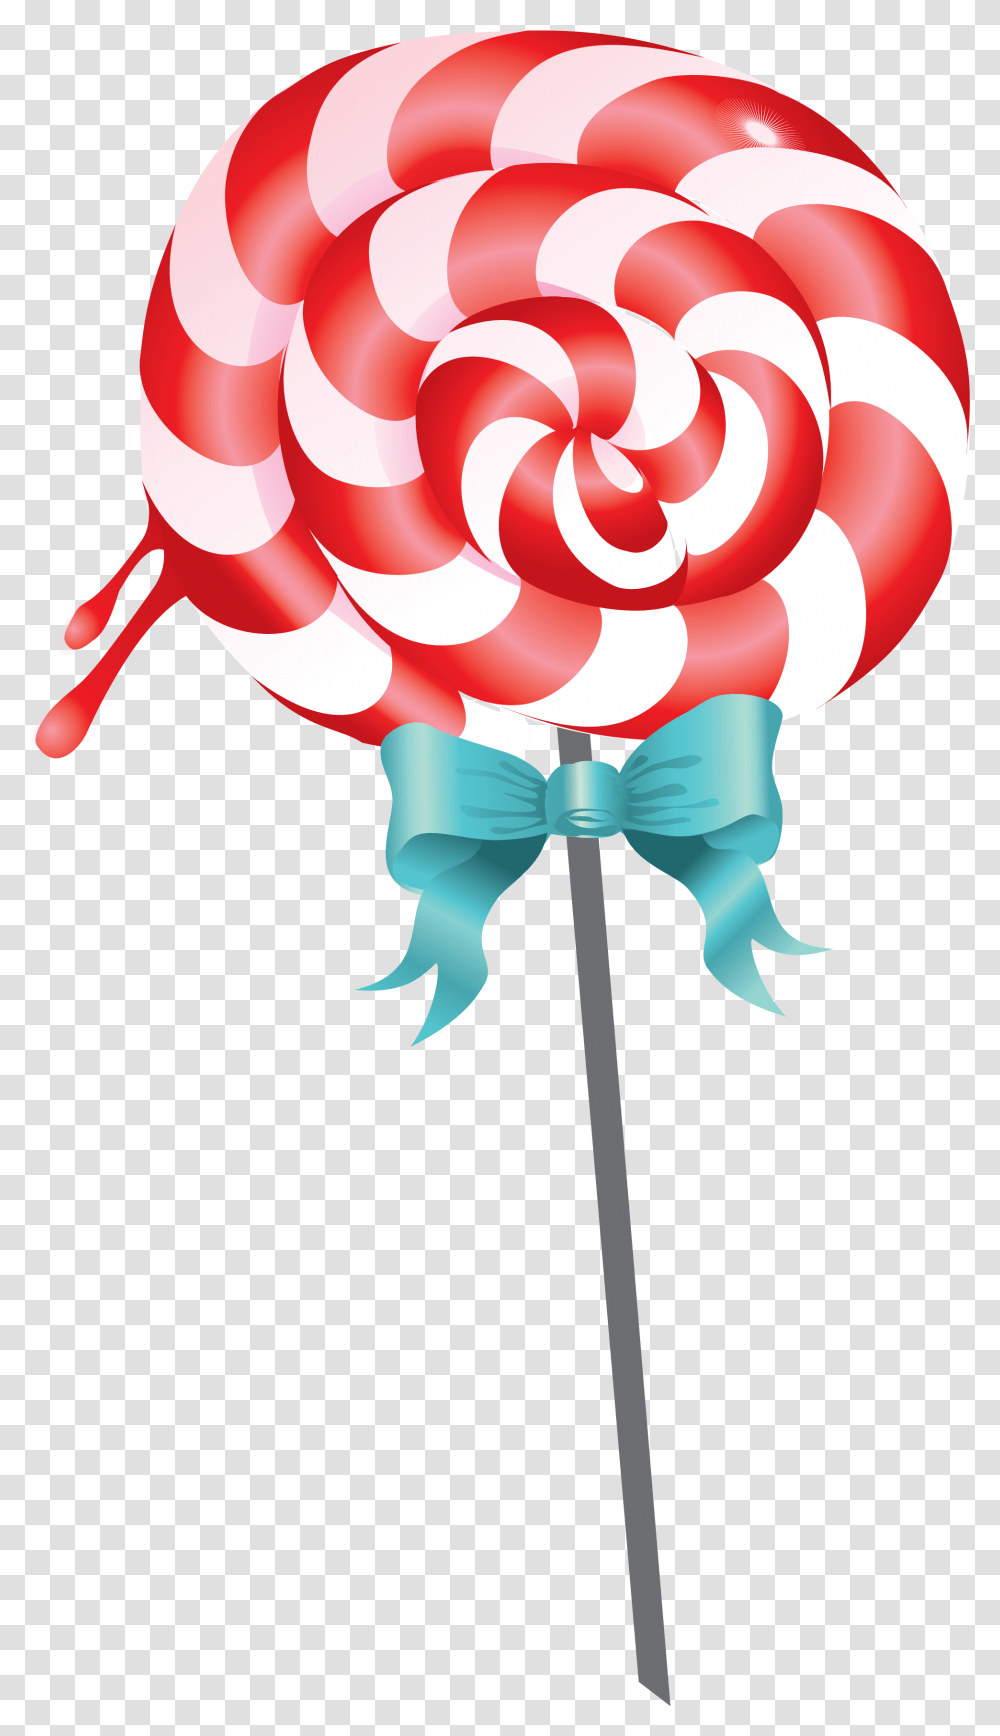 Lollipop Clip Art Pink Lollipop Candy Clipart, Balloon, Food, Sweets, Confectionery Transparent Png